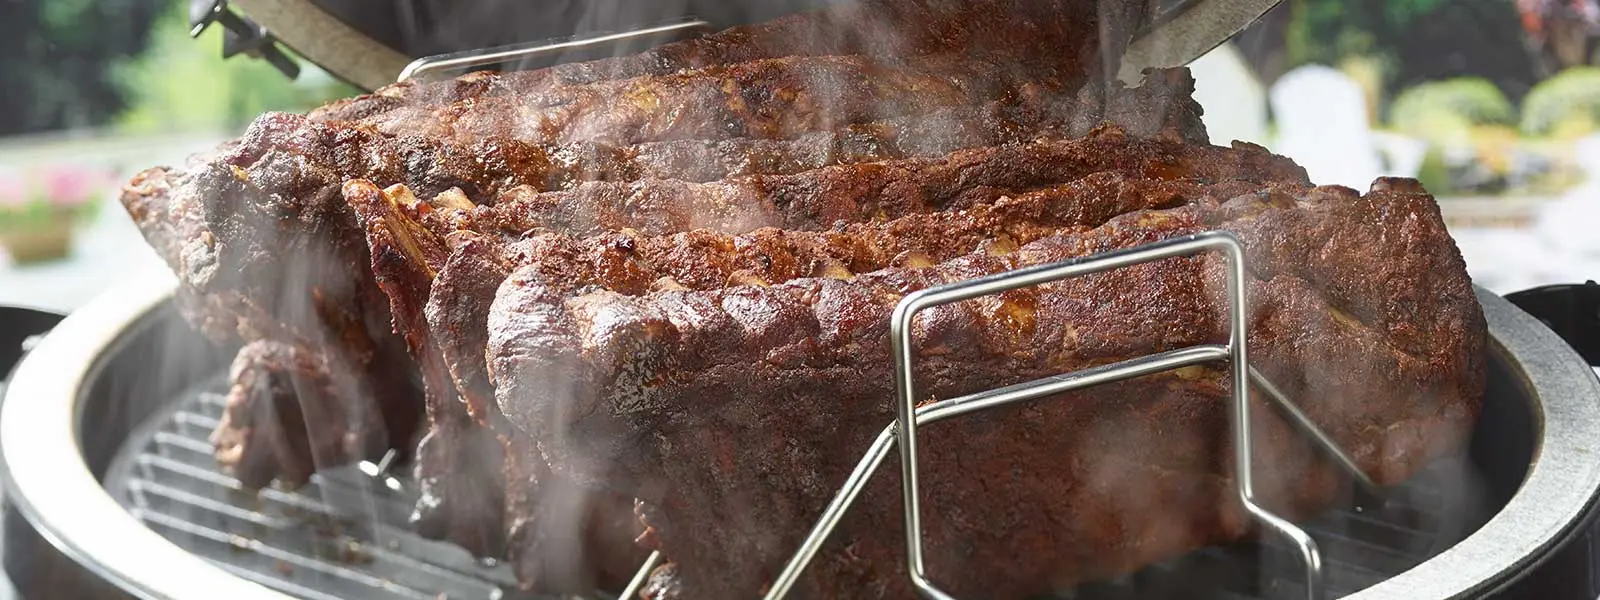 smoked beef ribs big green egg - How do you set up a Green EGG for smoking ribs